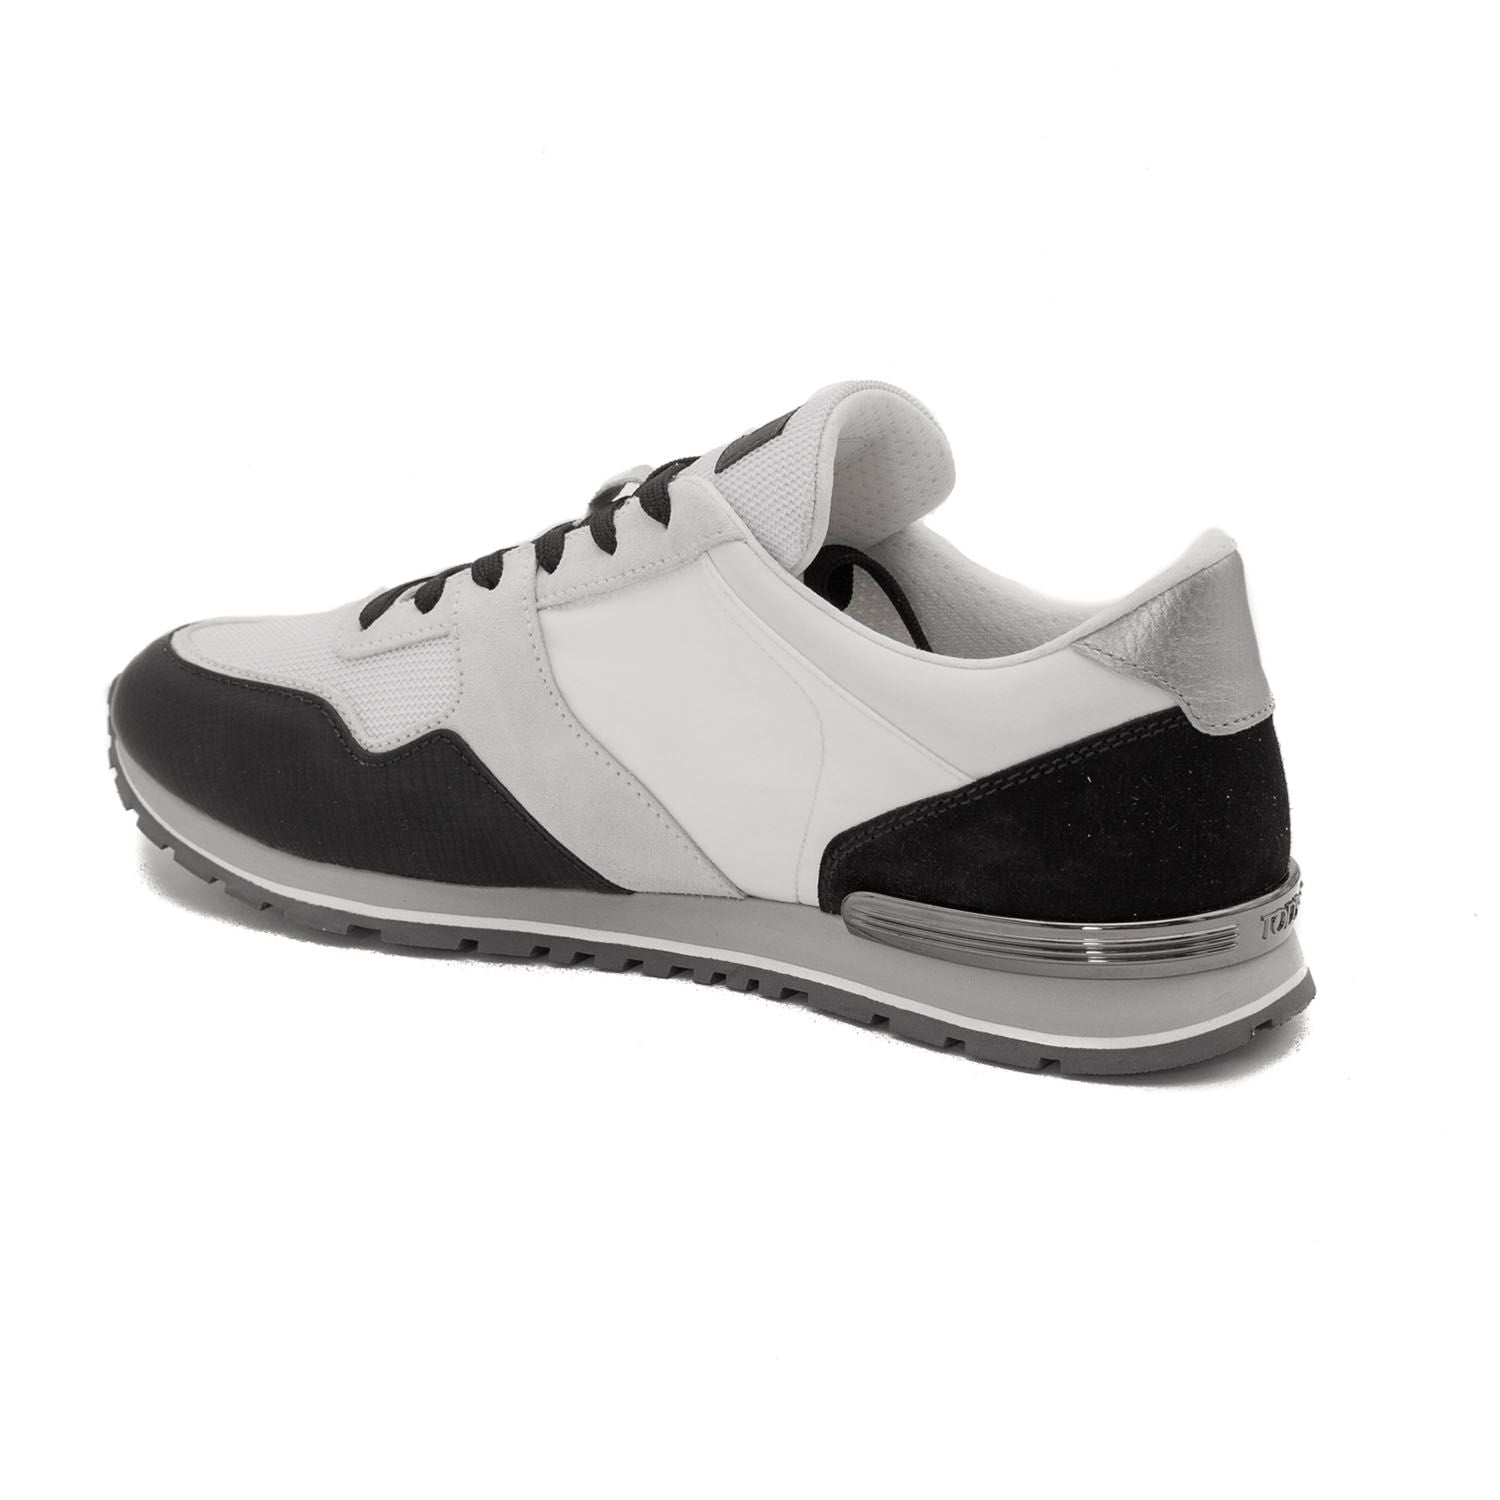 Tod'S Men'S Leather Fabric Sneaker Shoes White/Black - SewingCode